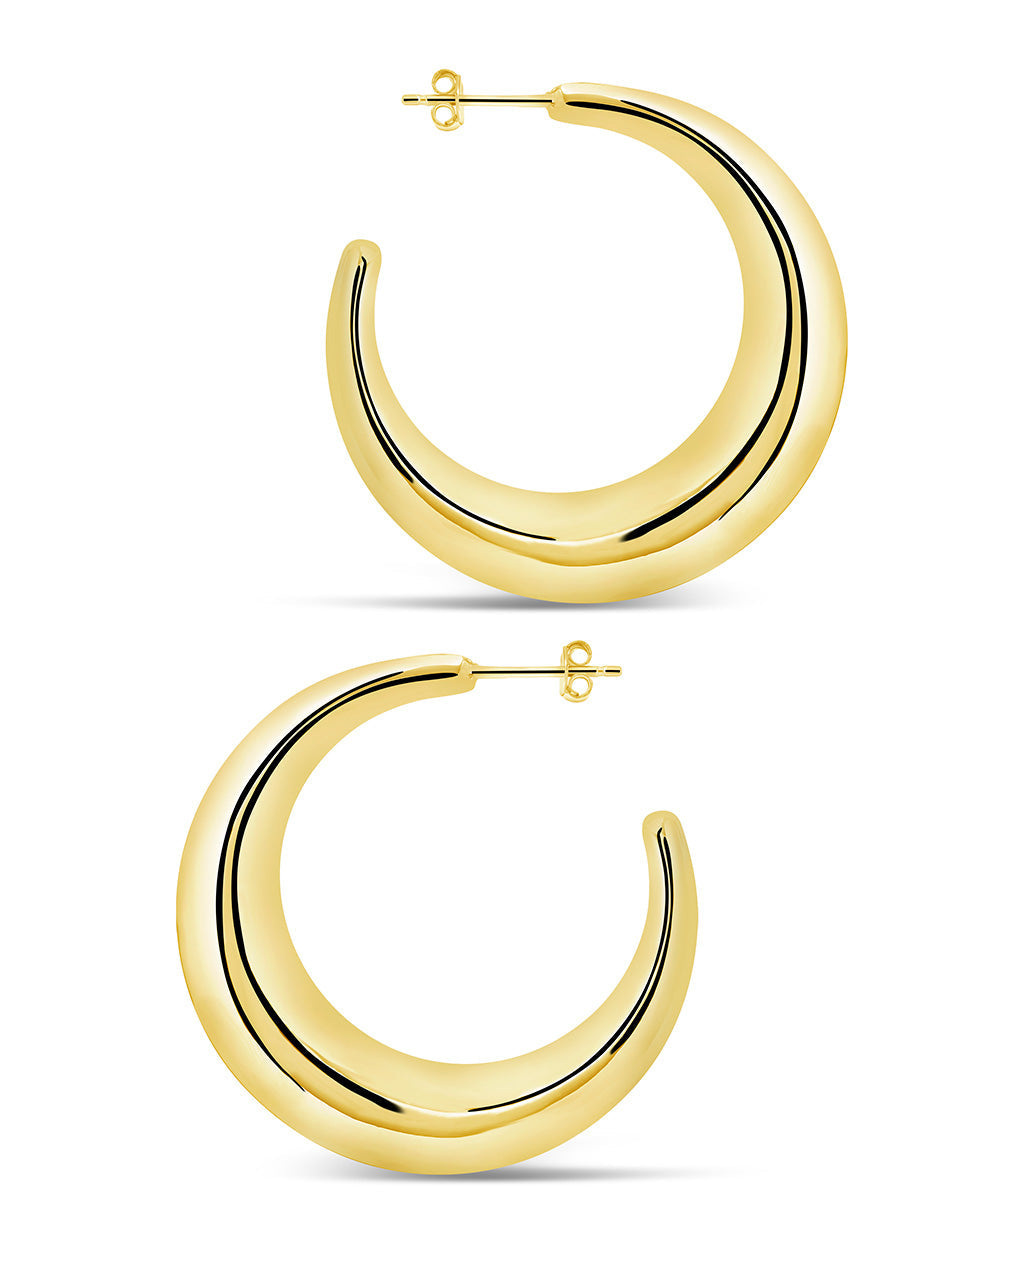 Trixie Hoops Earring Sterling Forever 